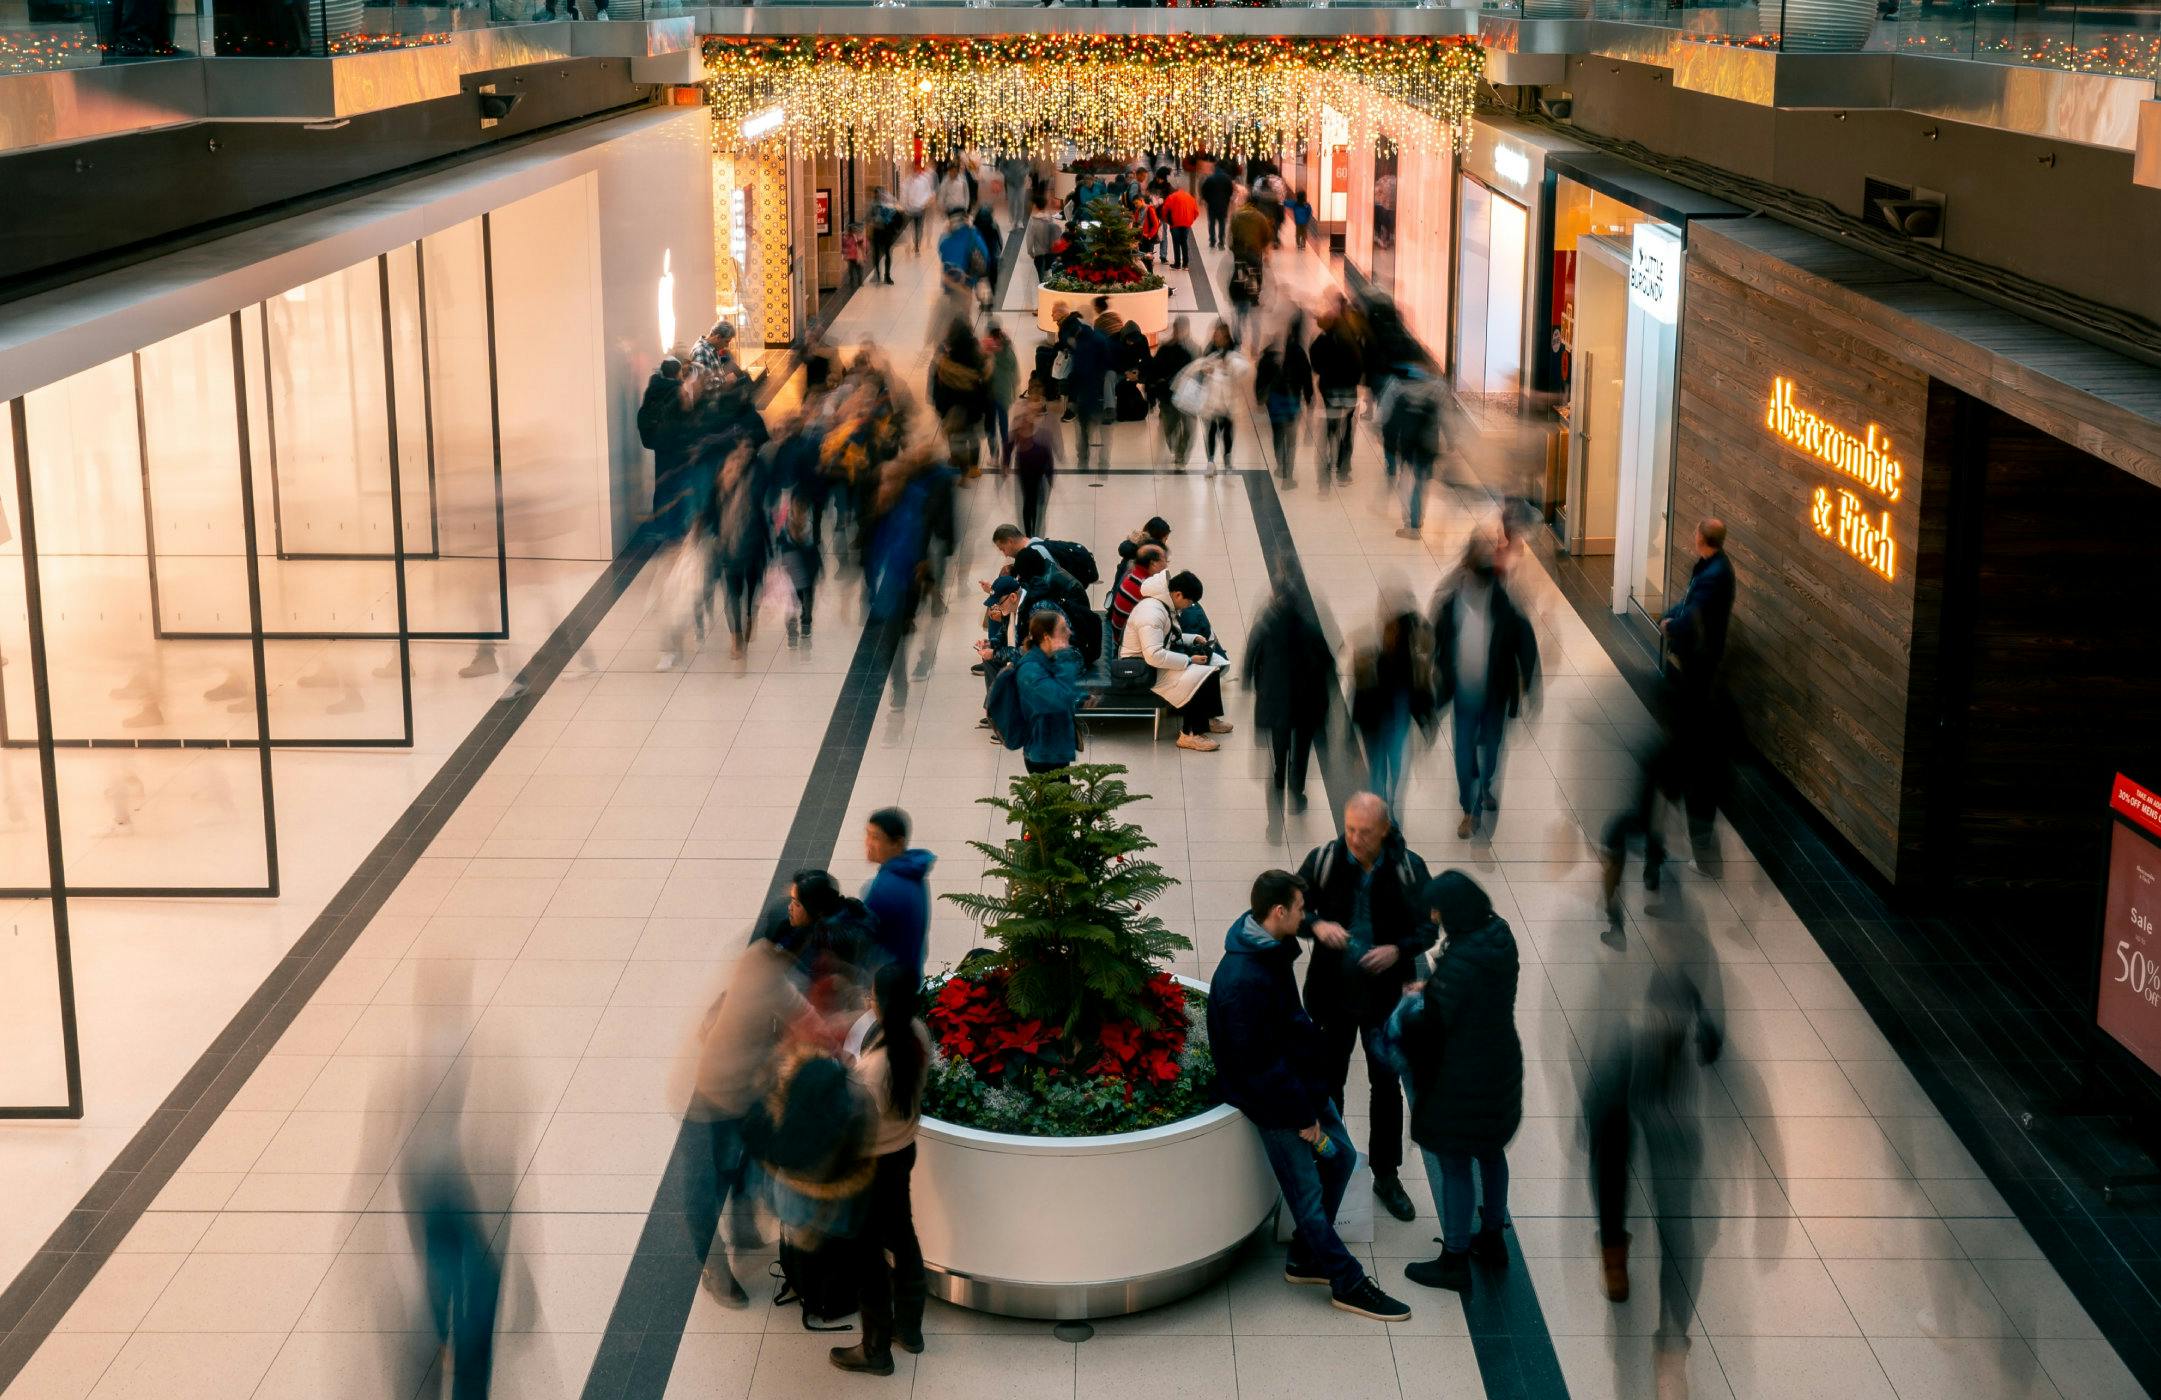 Photograph of busy shopping mall